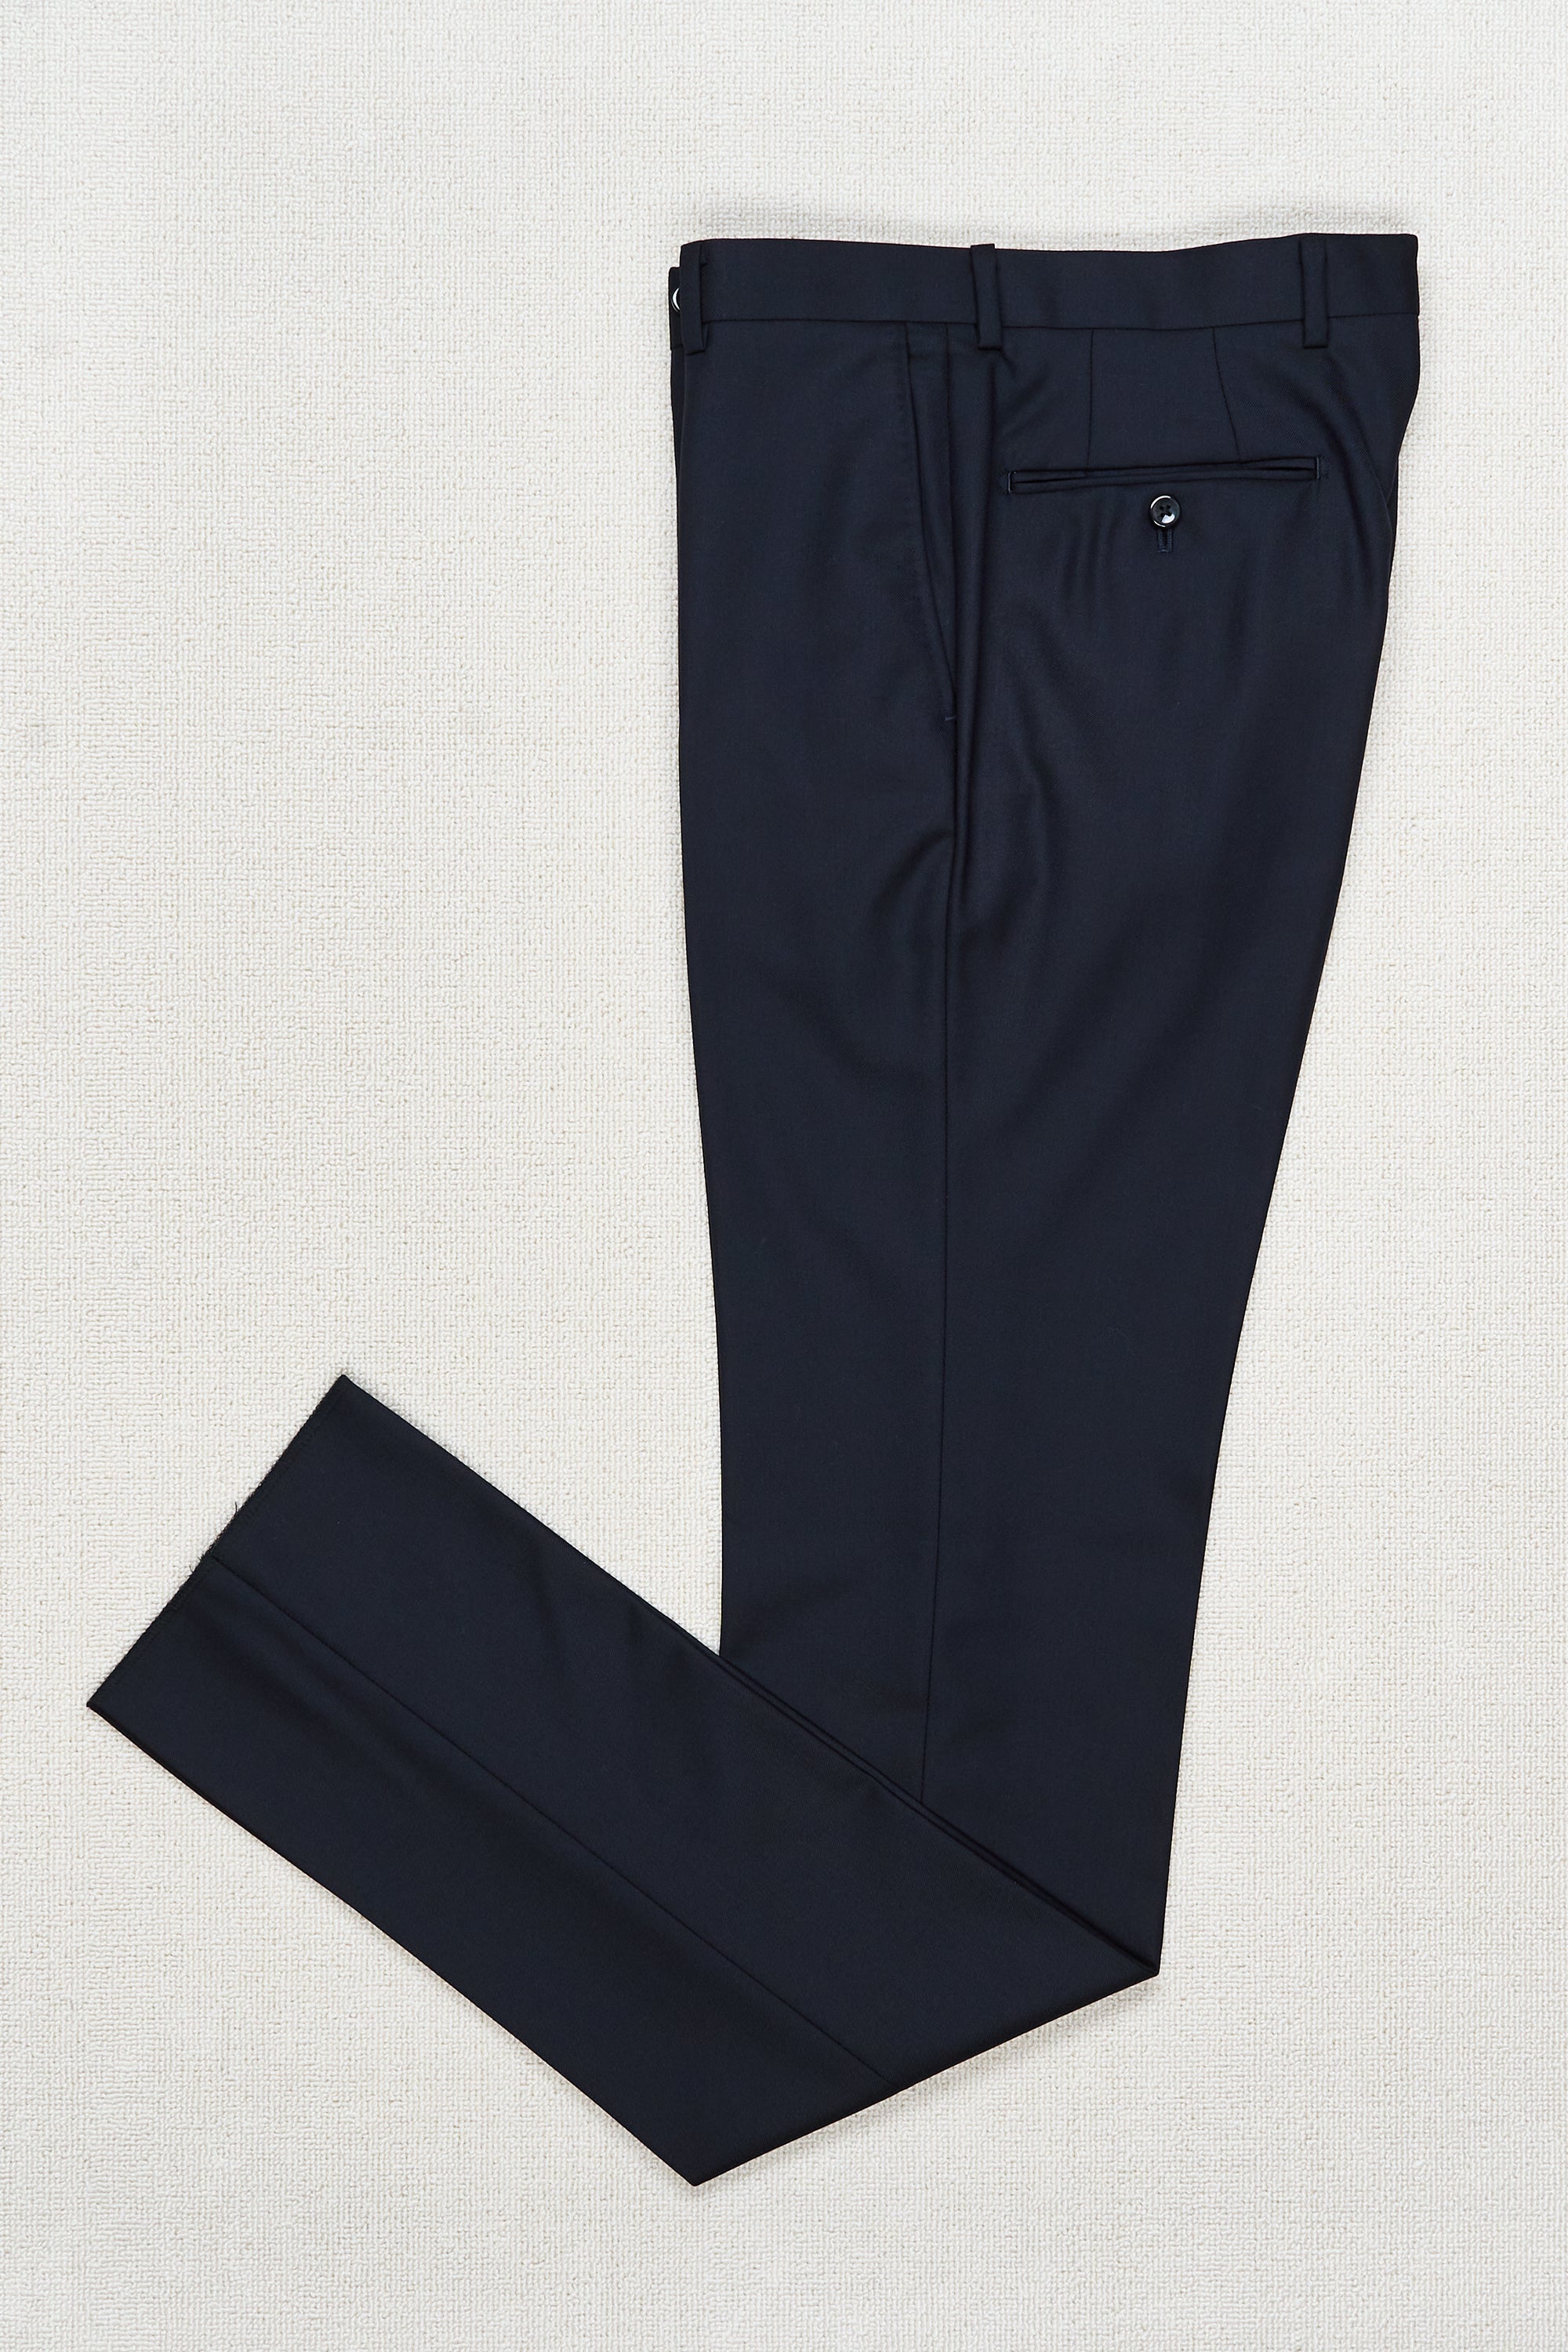 The Armoury by Ring Jacket Model A Navy Wool Trousers